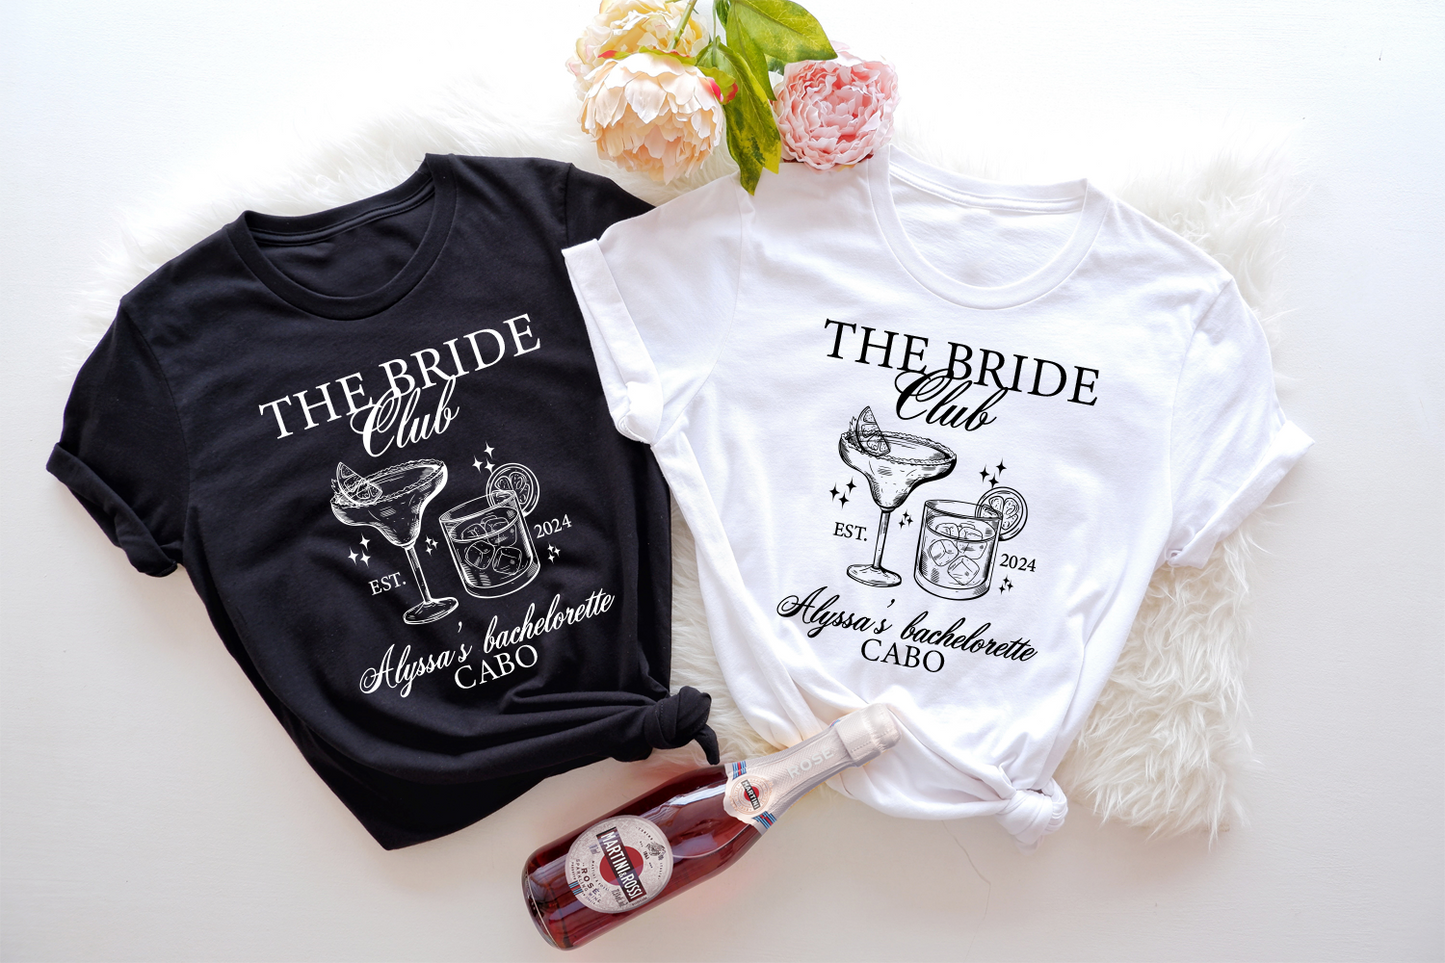 Create unforgettable memories and make your bachelorette celebration truly special with custom bachelorette party t-shirts. 